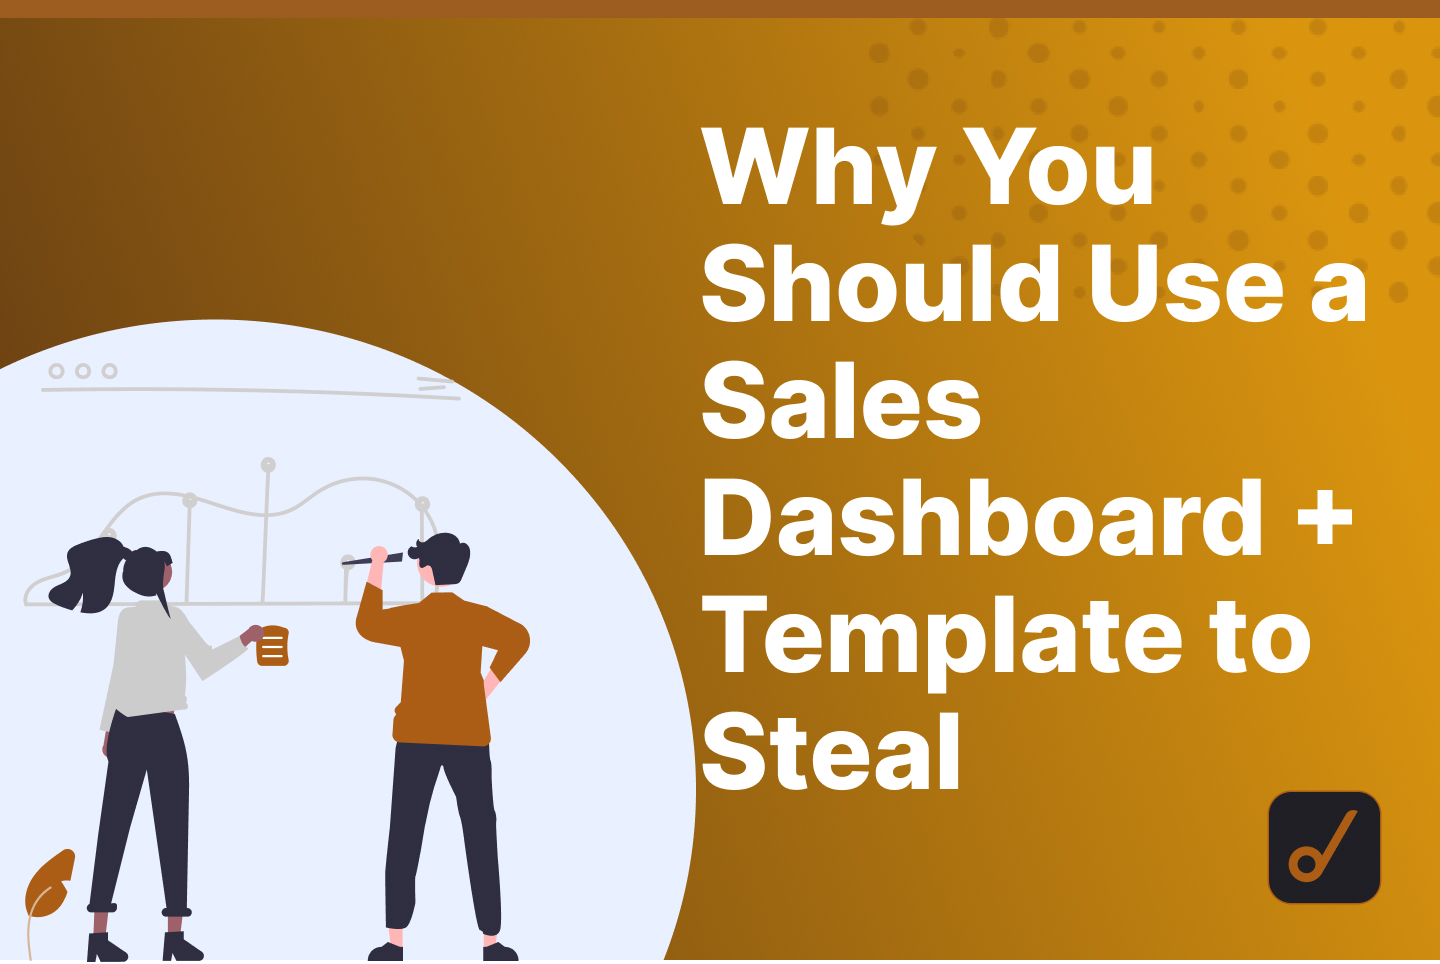 Why You Should Use a Sales Dashboard + Template to Steal